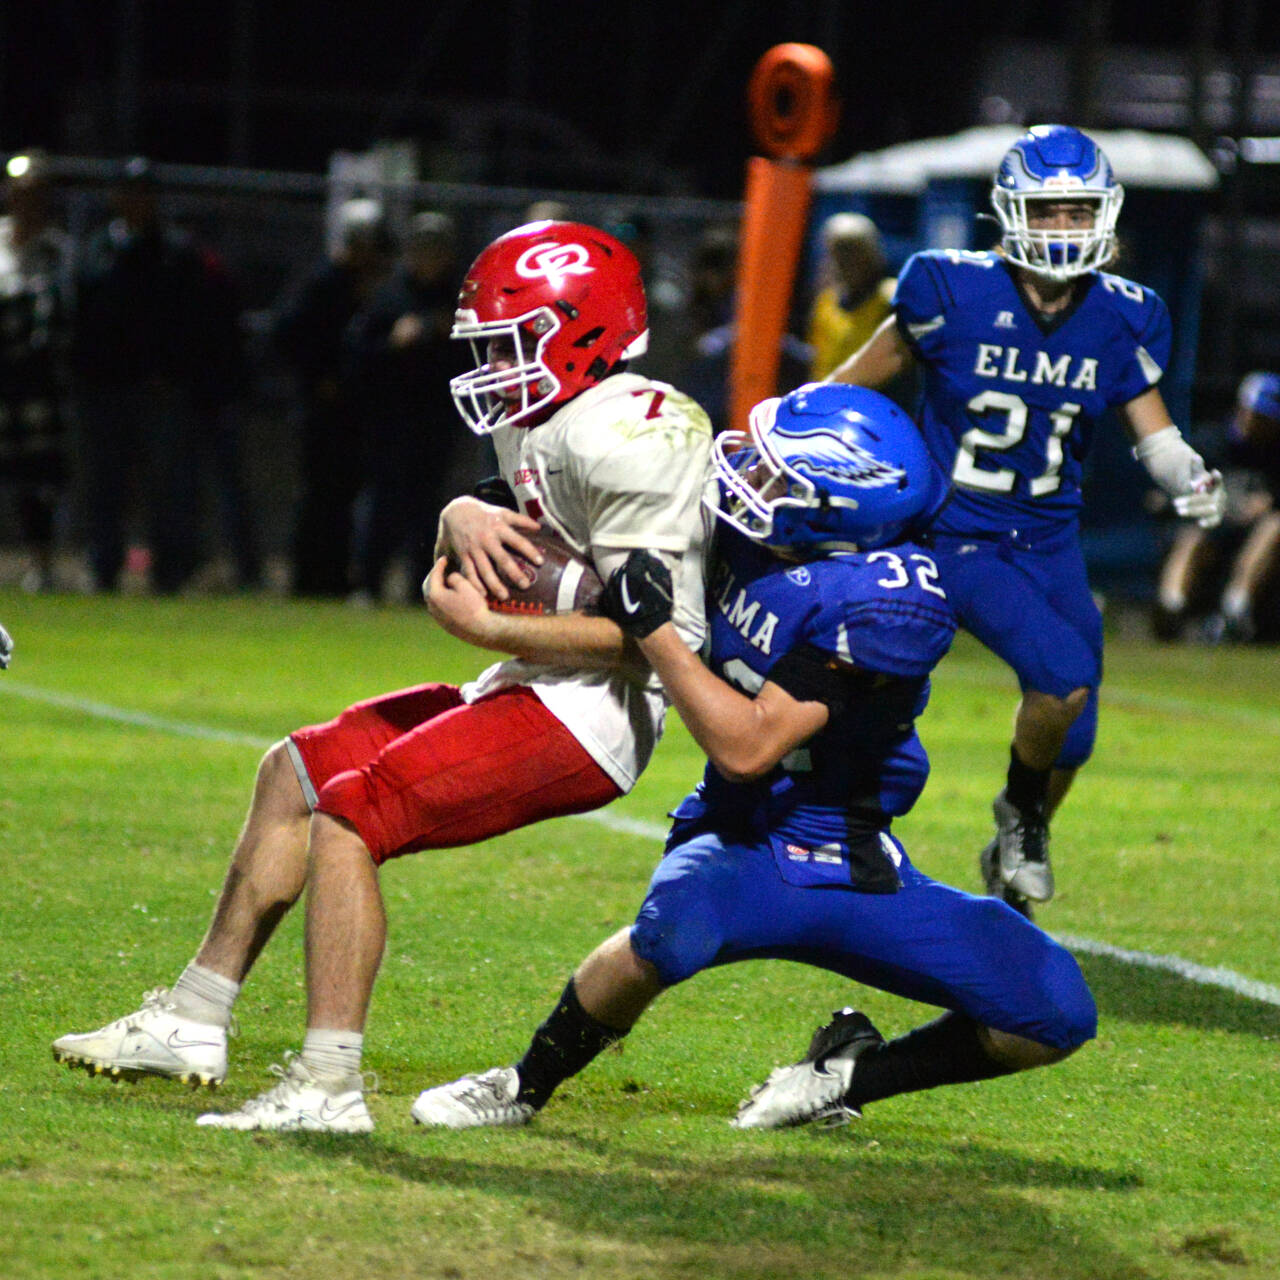 RYAN SPARKS | THE DAILY WORLD Elma linebacker Isaac Phillips tackles Castle Rock running back Ian Burton during the Eagles’ 28-10 loss on Friday at Davis Field in Elma.